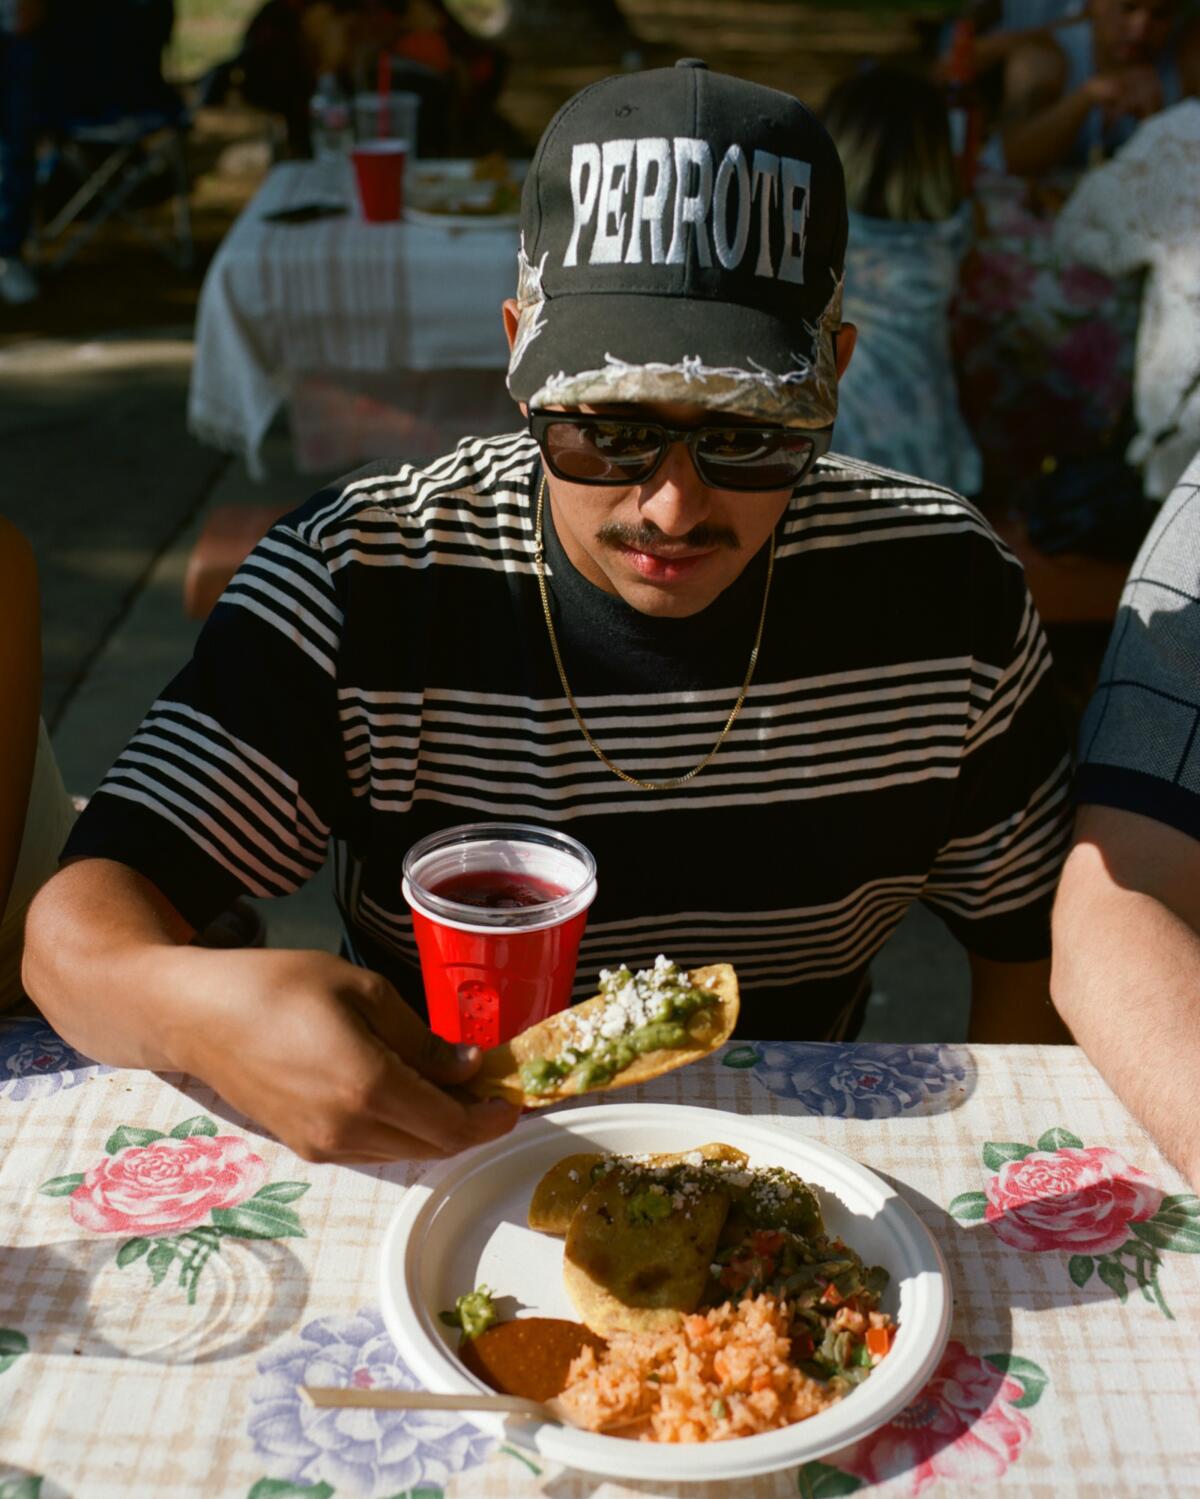 a man wearing sunglasses and a hat begins to eat a taco